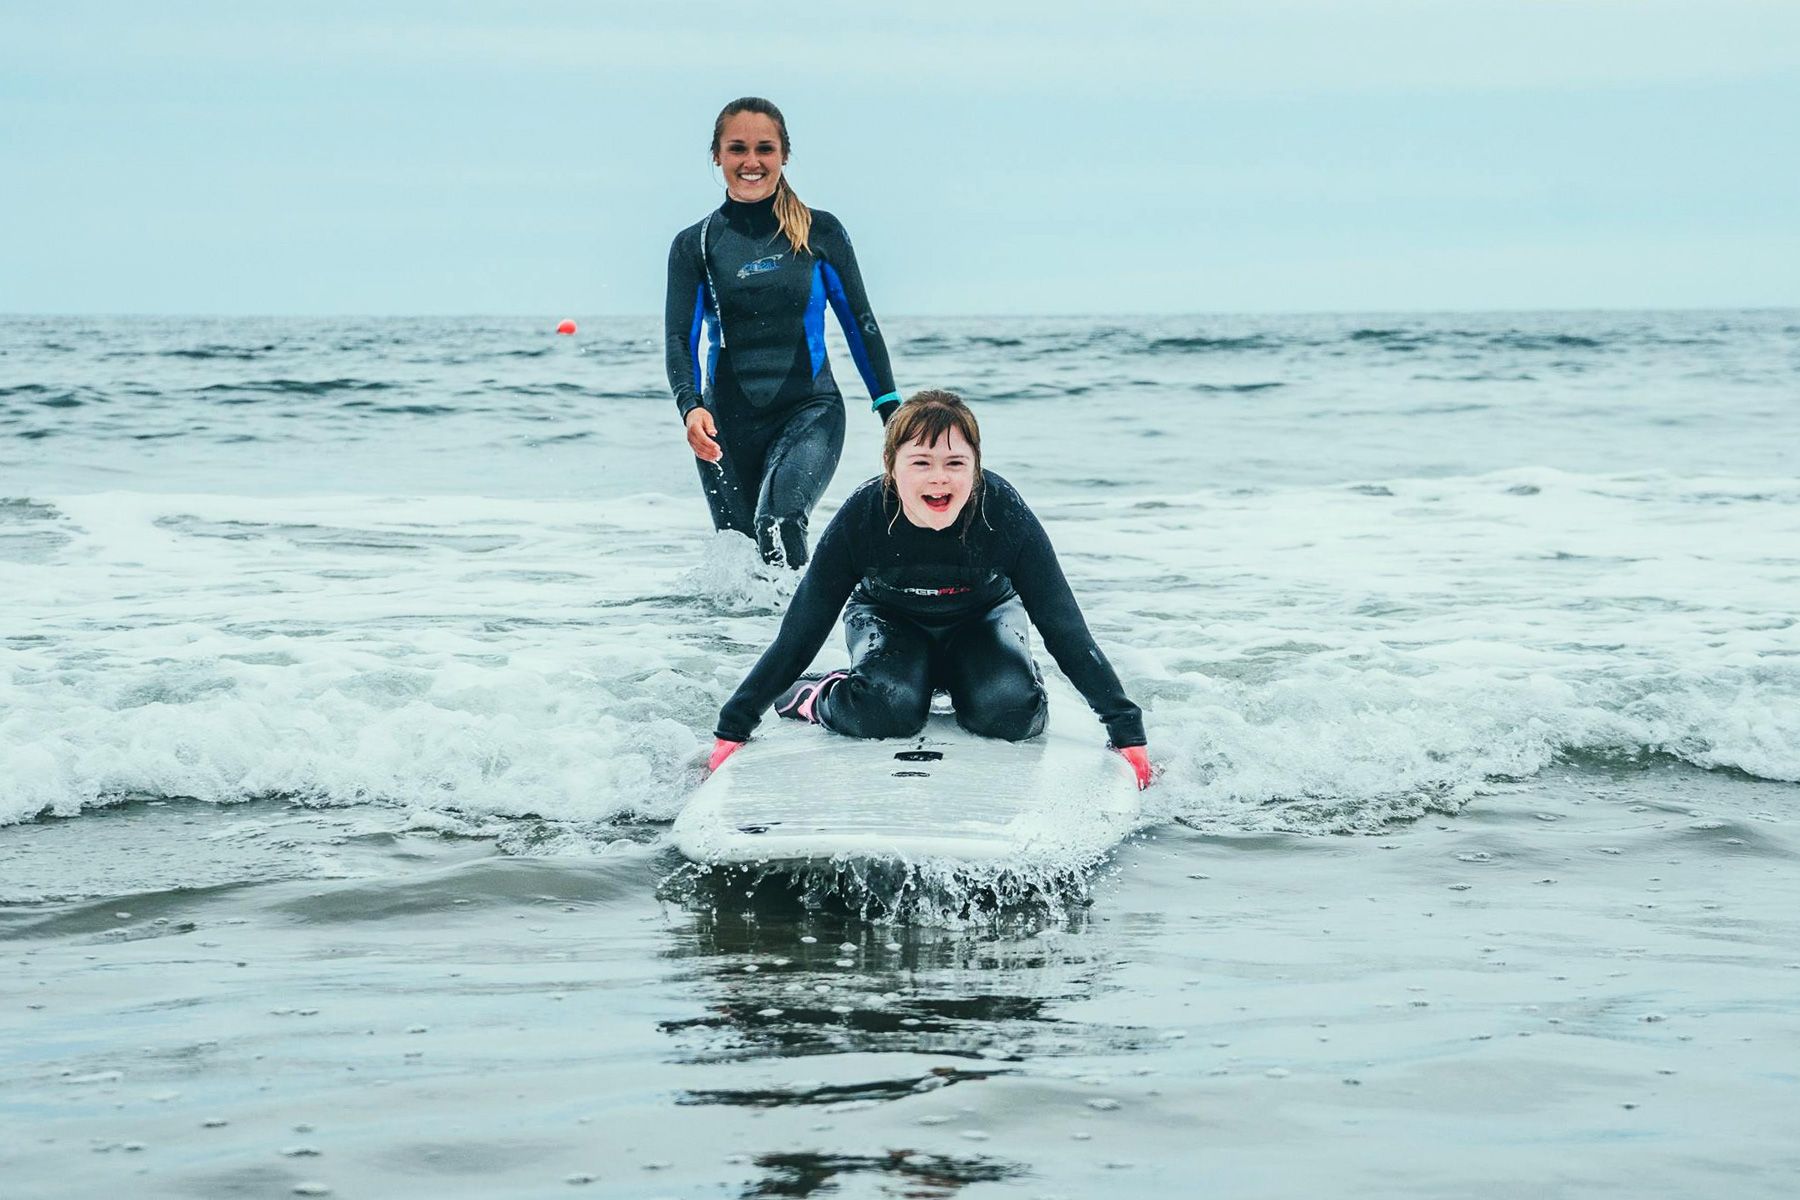 Surf's up for wish kid Hunter! 🏄 Hunter's wish to learn how to surf helped  him not only escape his daily routine of treatments, but also…